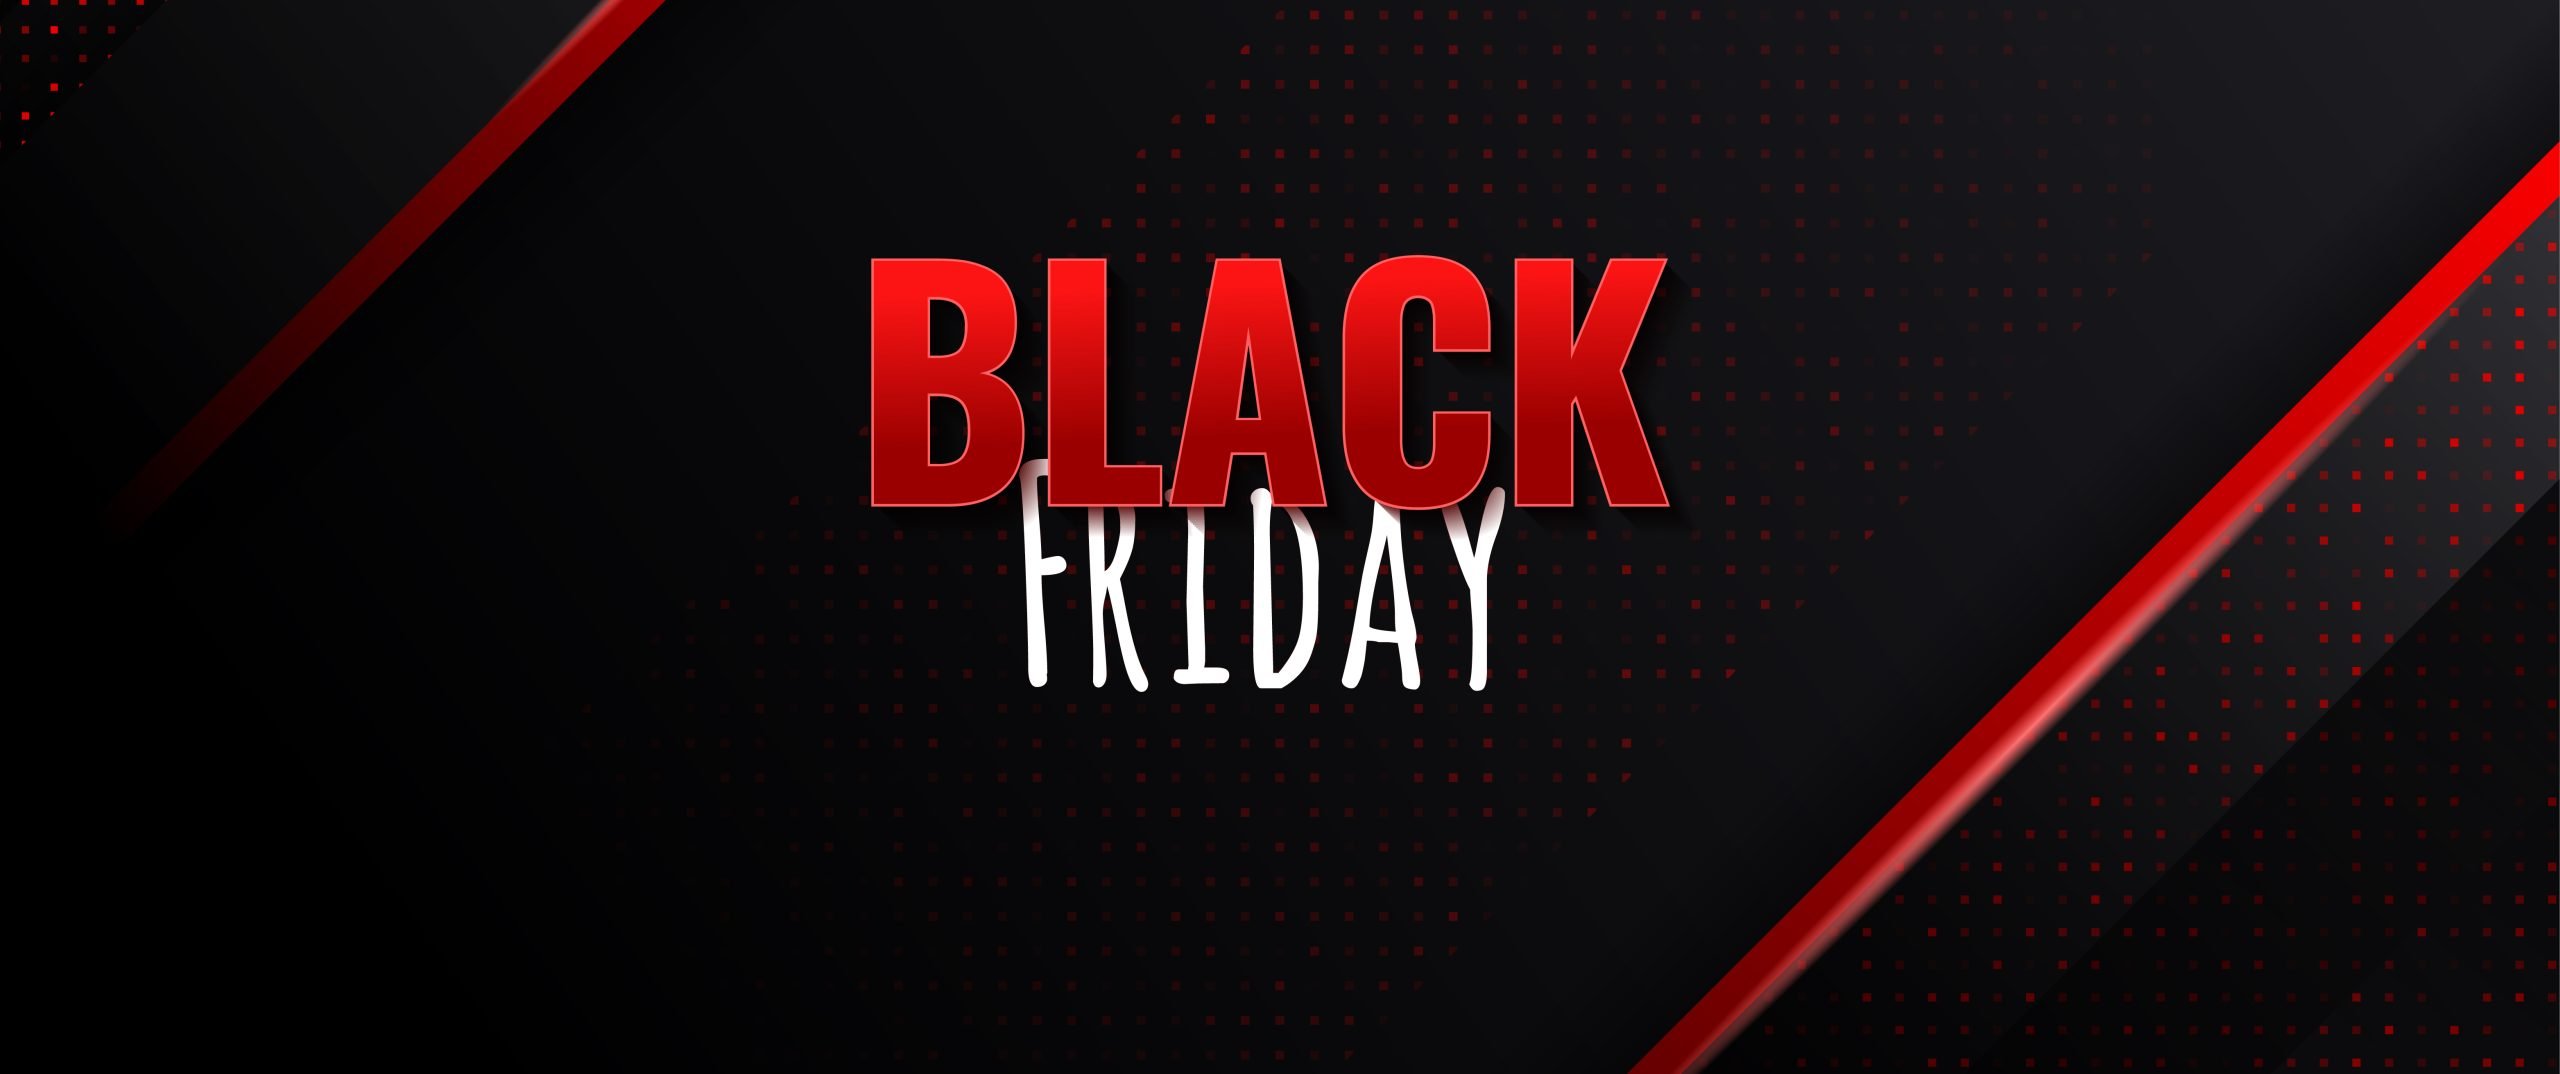 How to Make Black Friday Work for Your Business